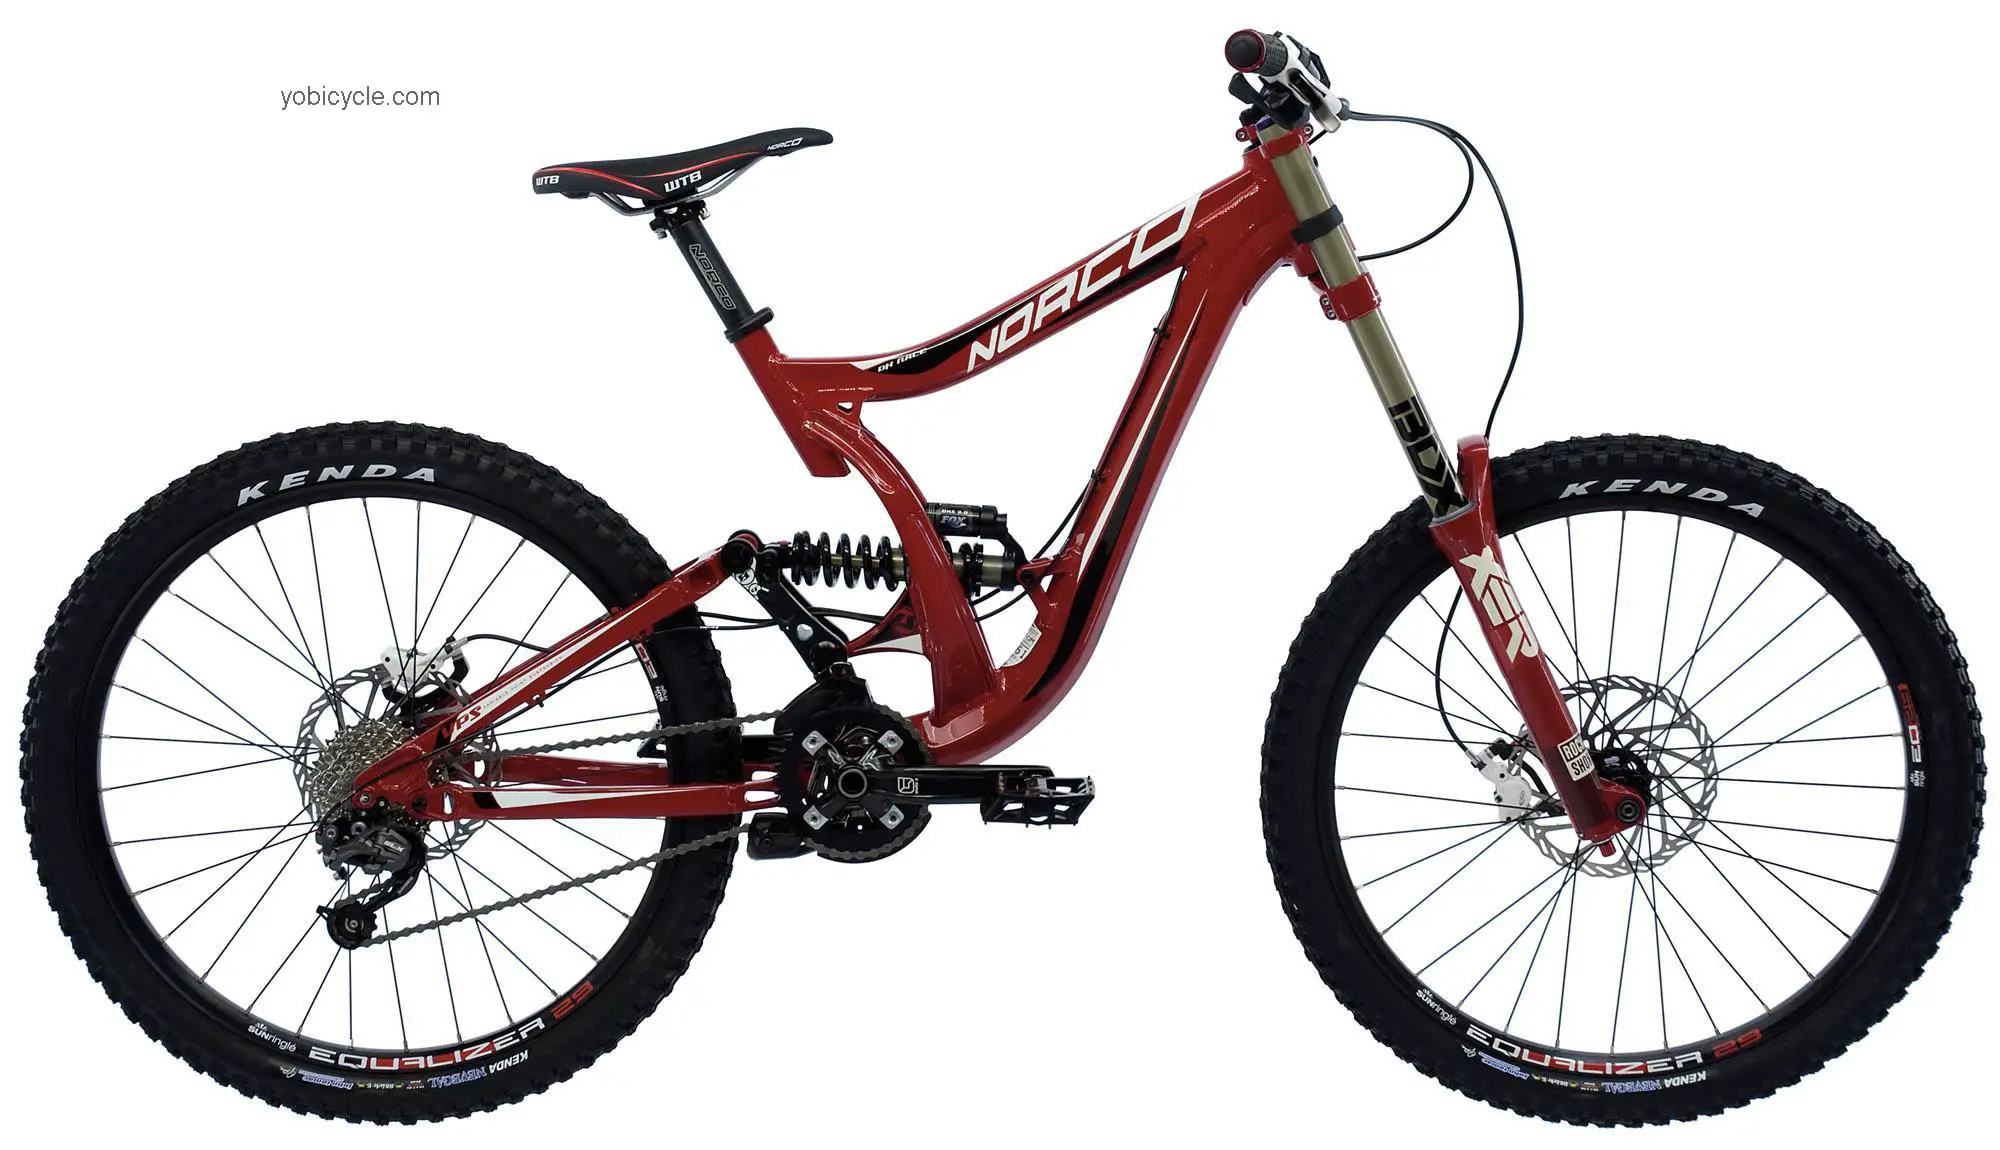 Norco DH 2011 comparison online with competitors